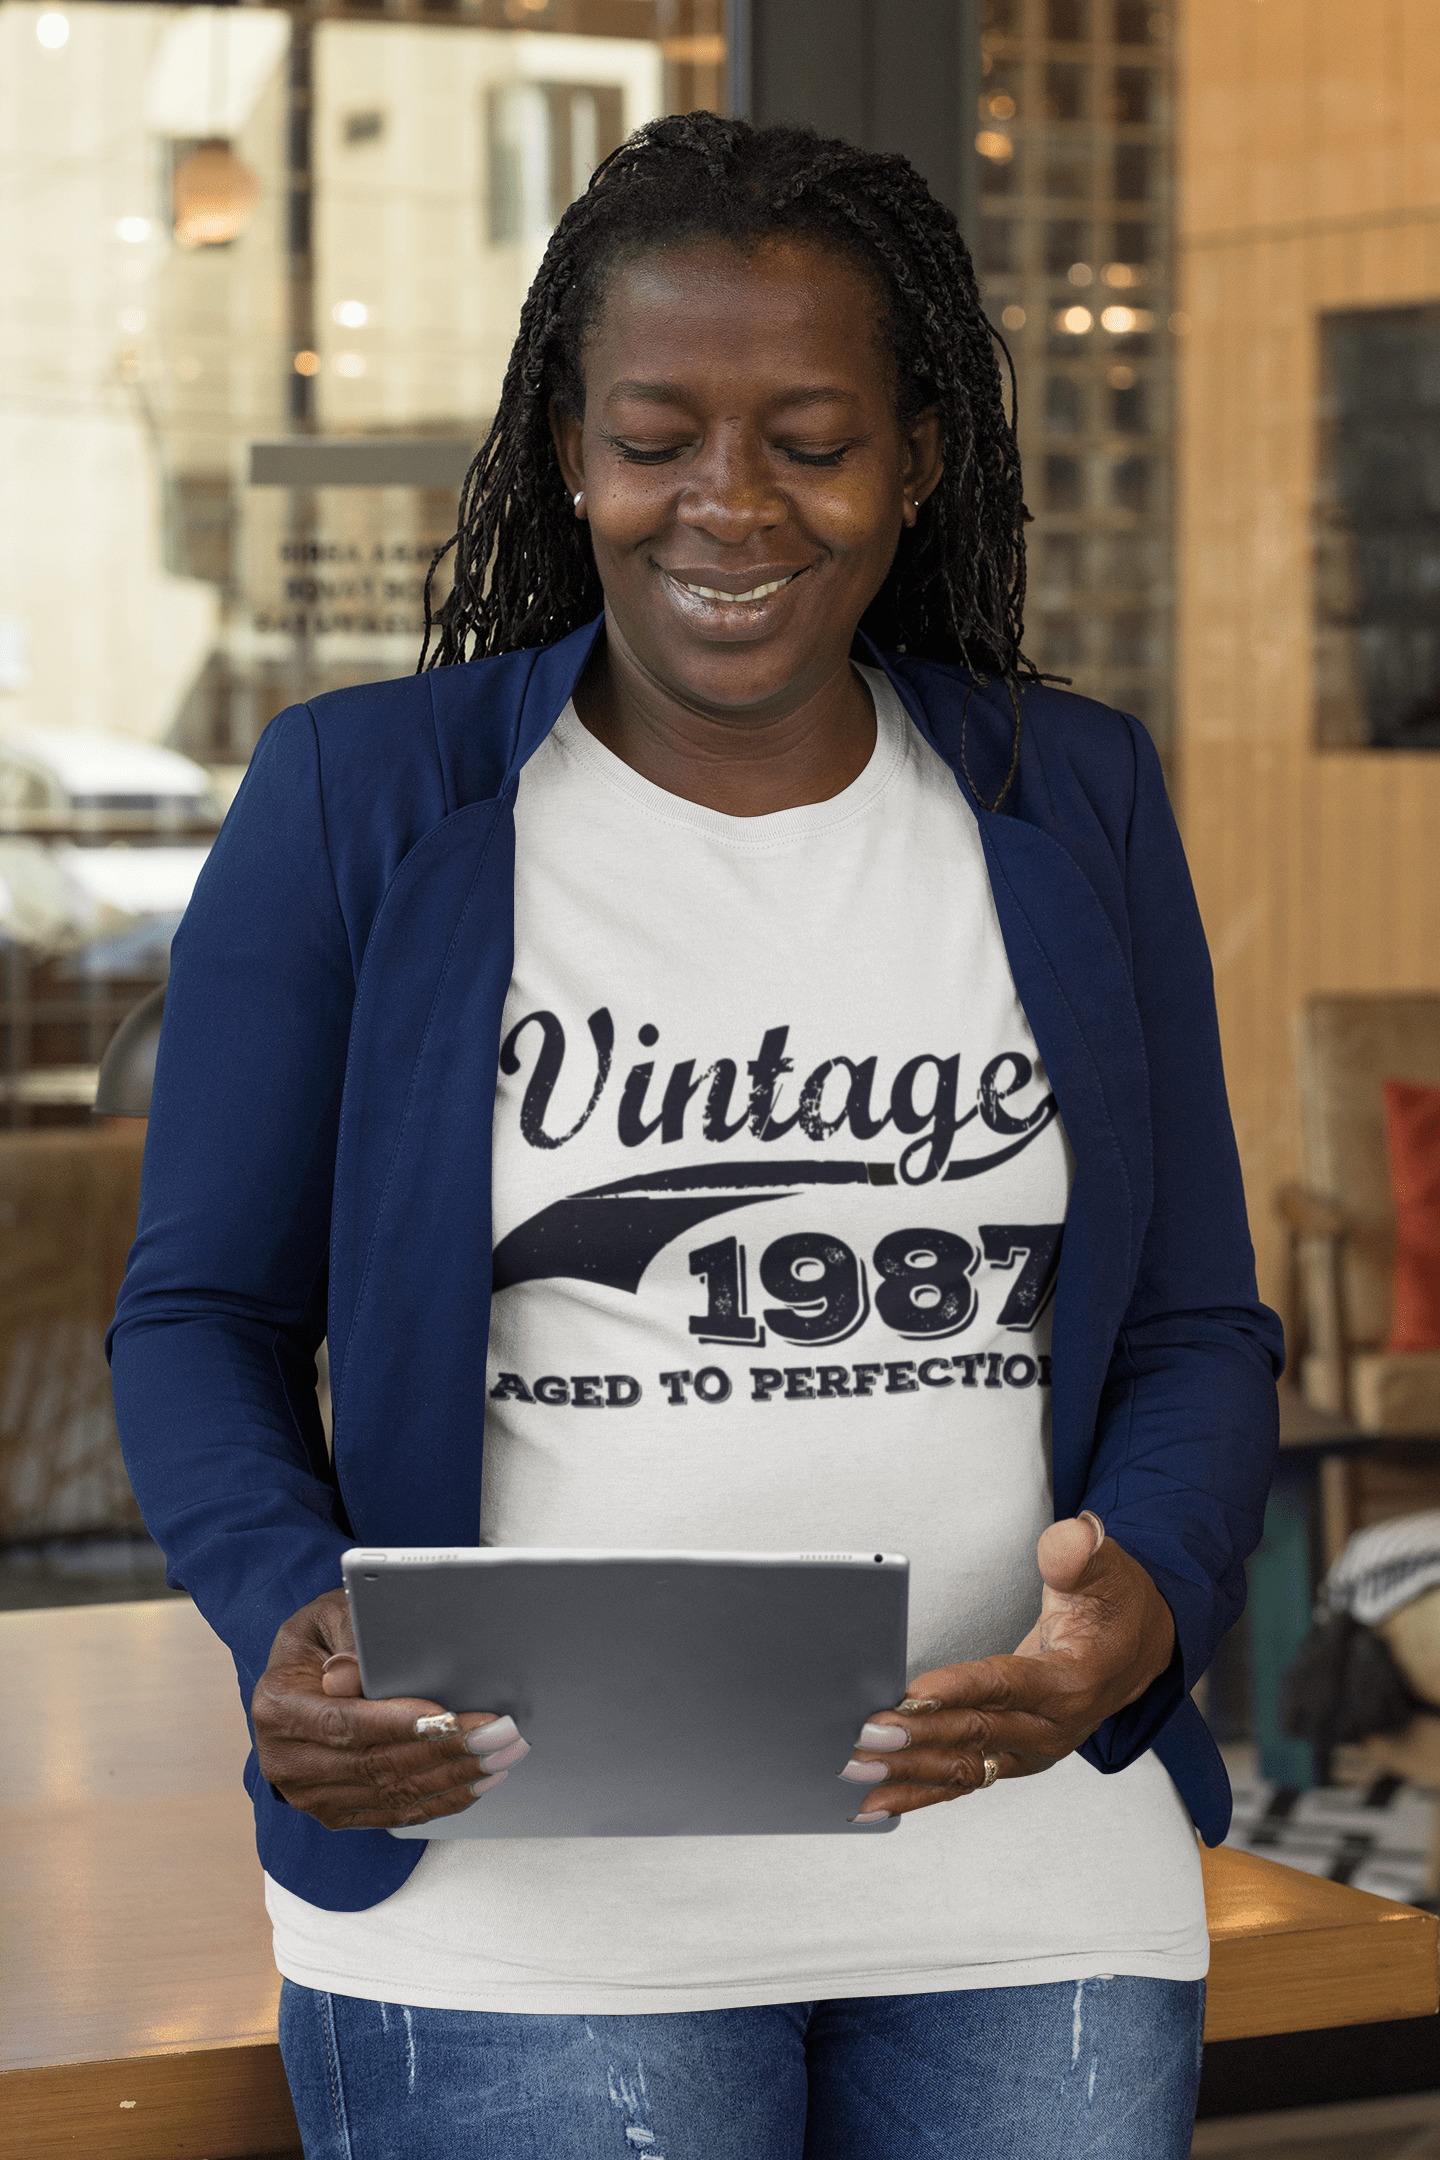 Vintage Aged To Perfection 1987, White, Women's Short Sleeve Round Neck T-shirt, gift t-shirt 00344